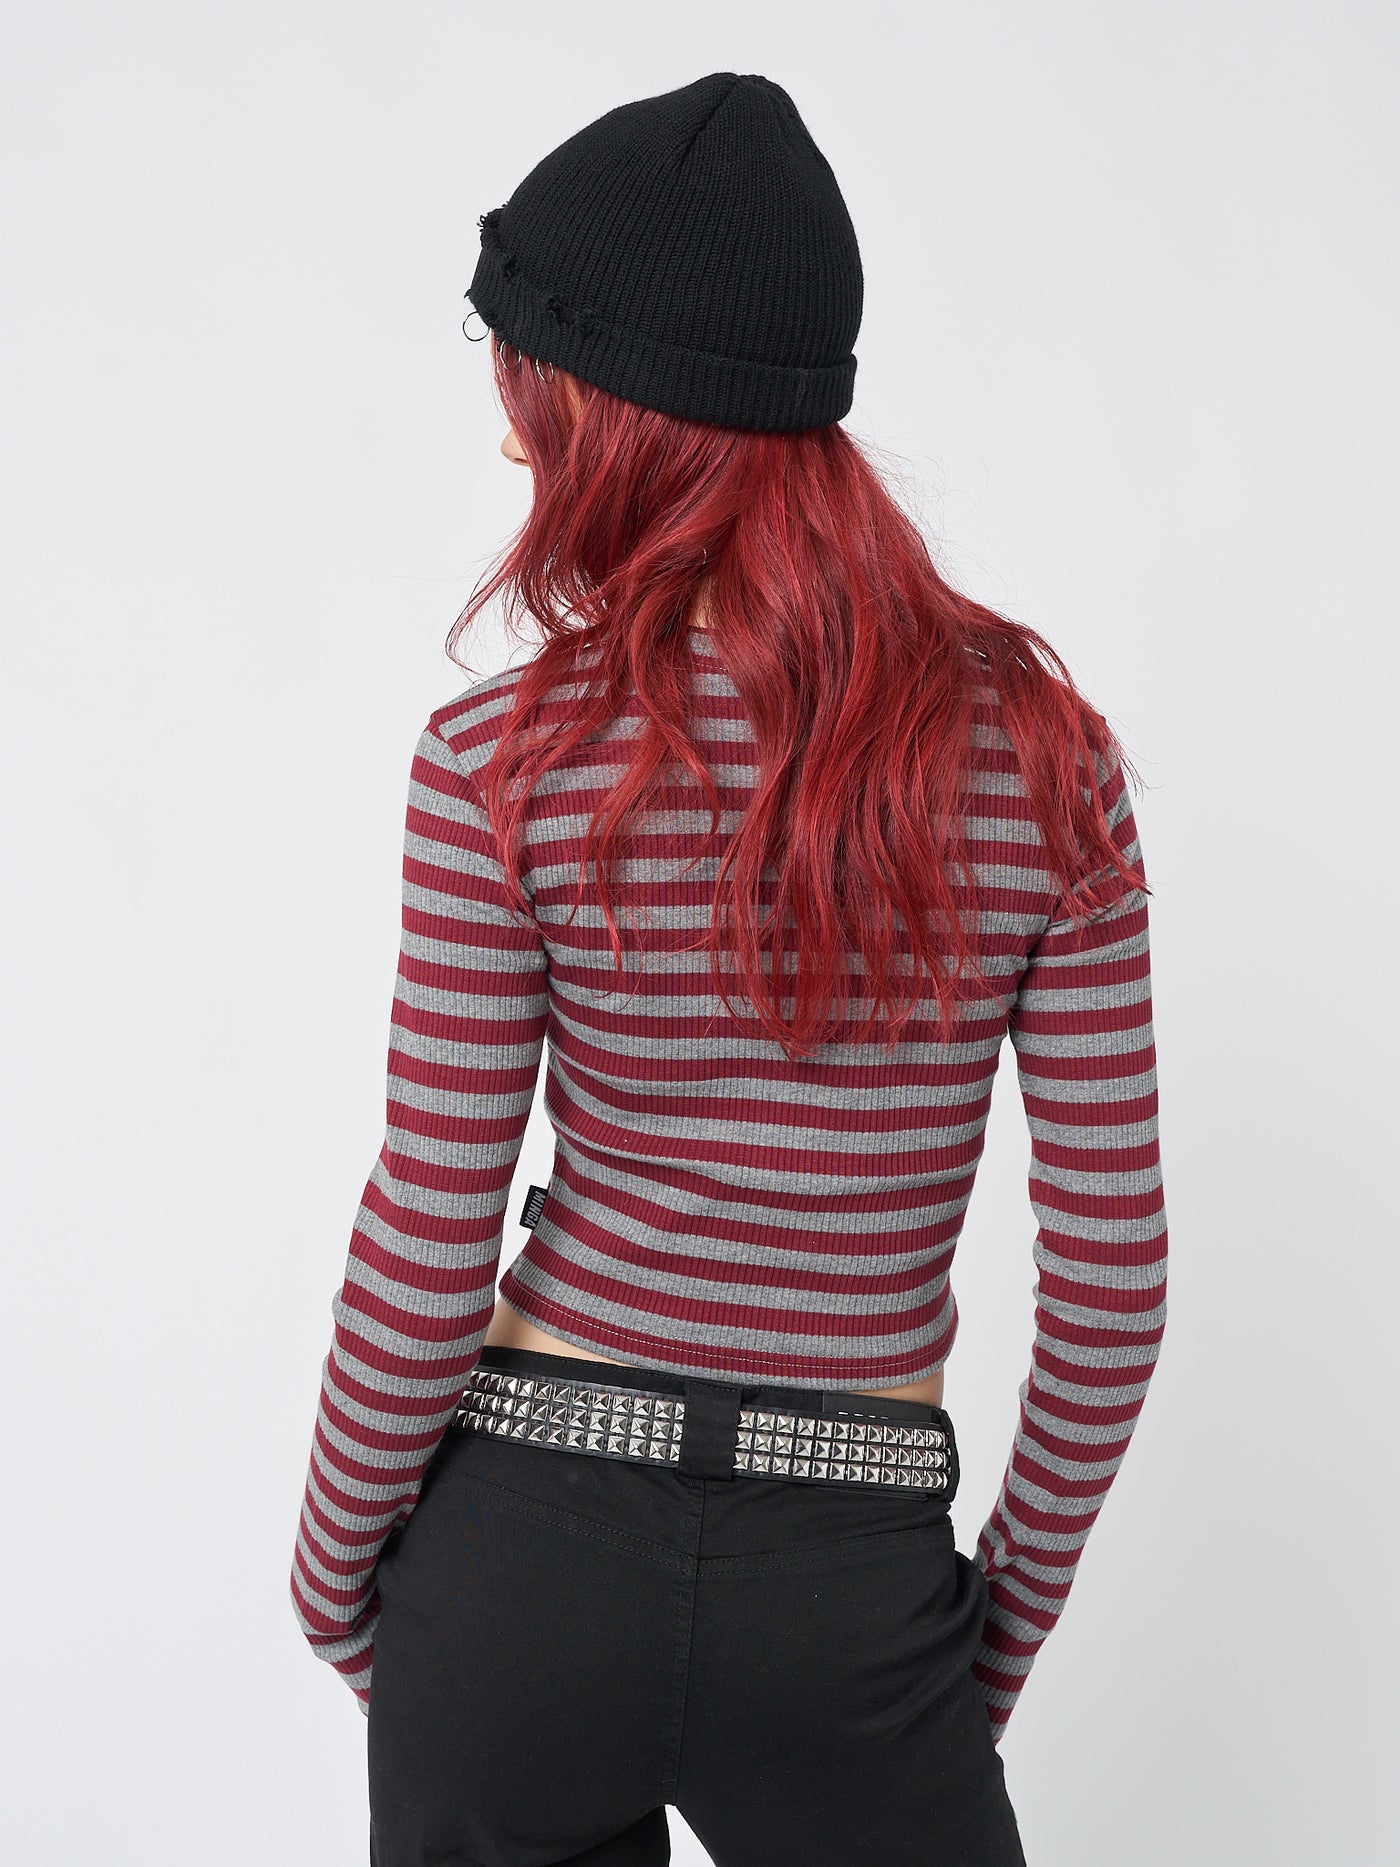 A trendy and stylish long-sleeved striped rib top in shades of grey and red, featuring star sign-inspired design.